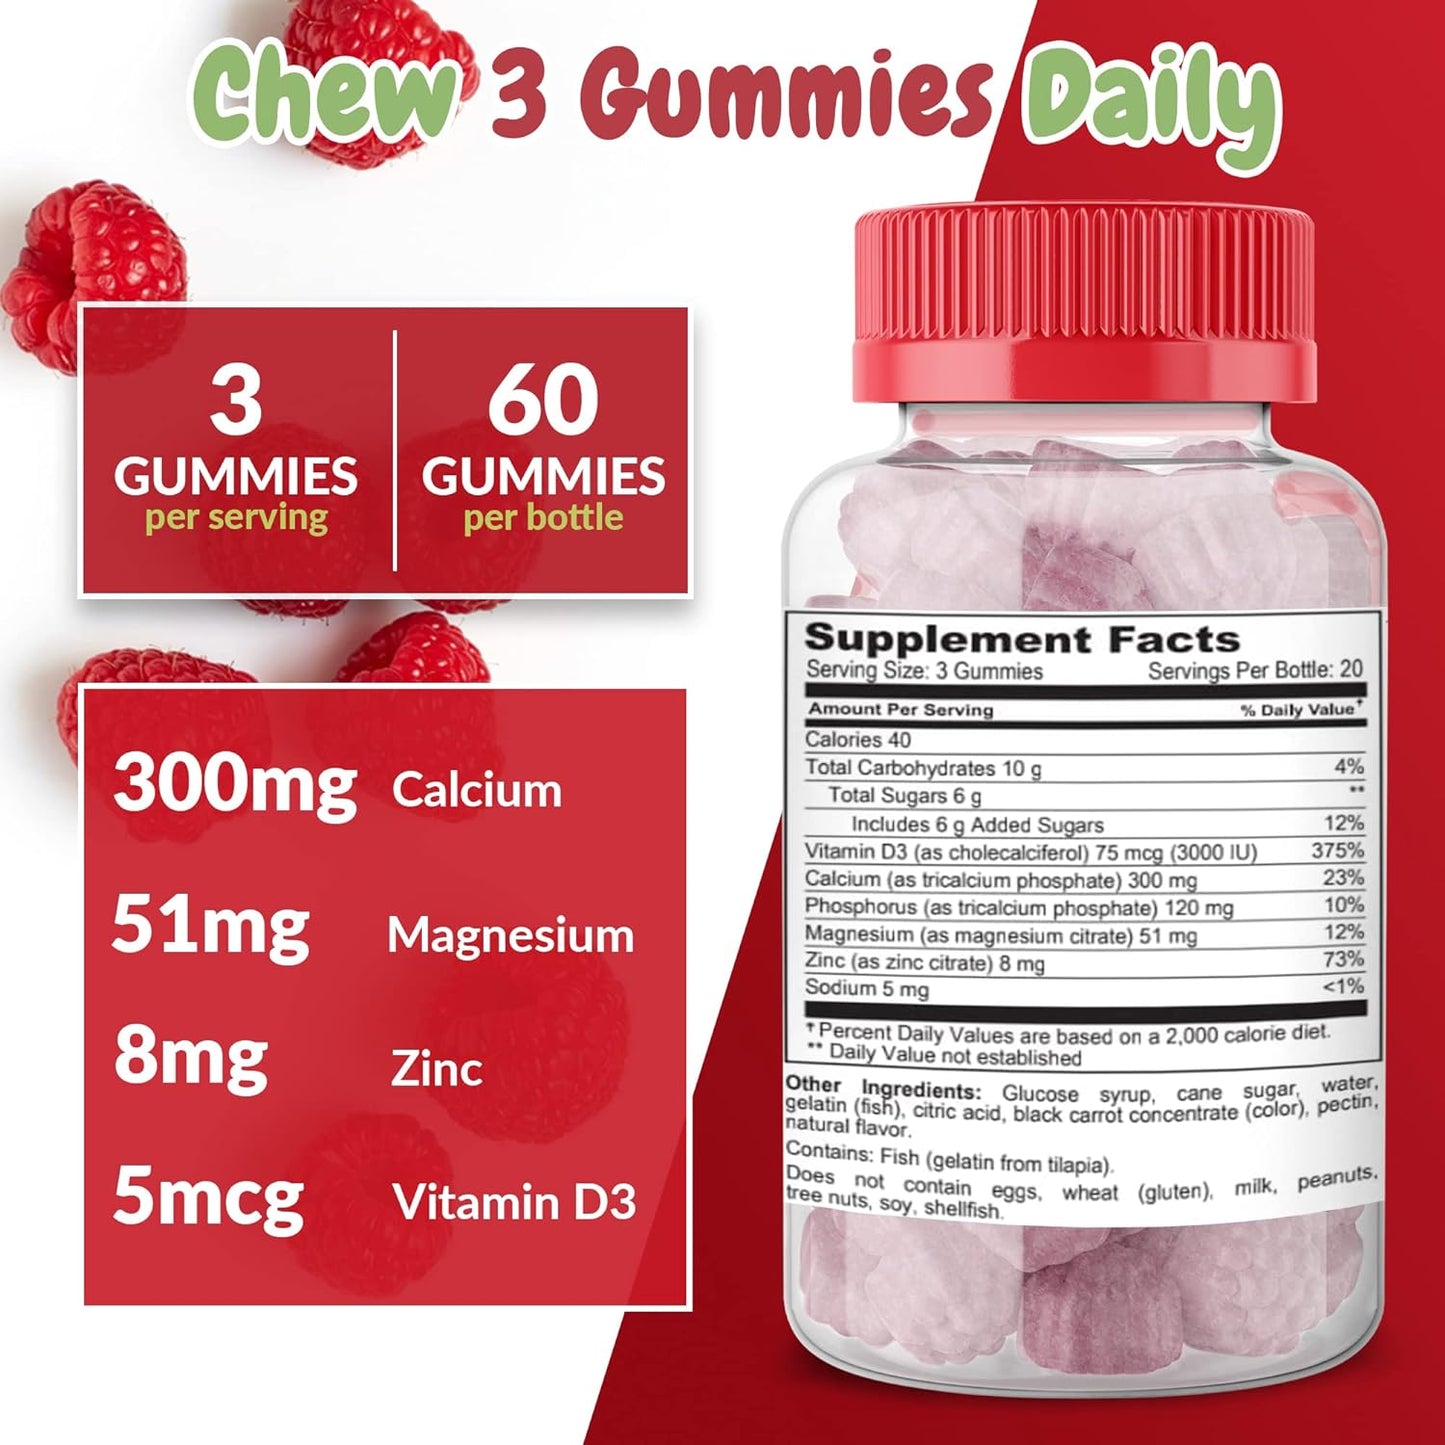 Calcium Magnesium & Zinc + Vitamin D Gummies | Bone Health Immune Health Energy and Muscle Function | Daily Dietary Vitamin Supplement | for Adults, Teens | Fruity Raspberry Flavor